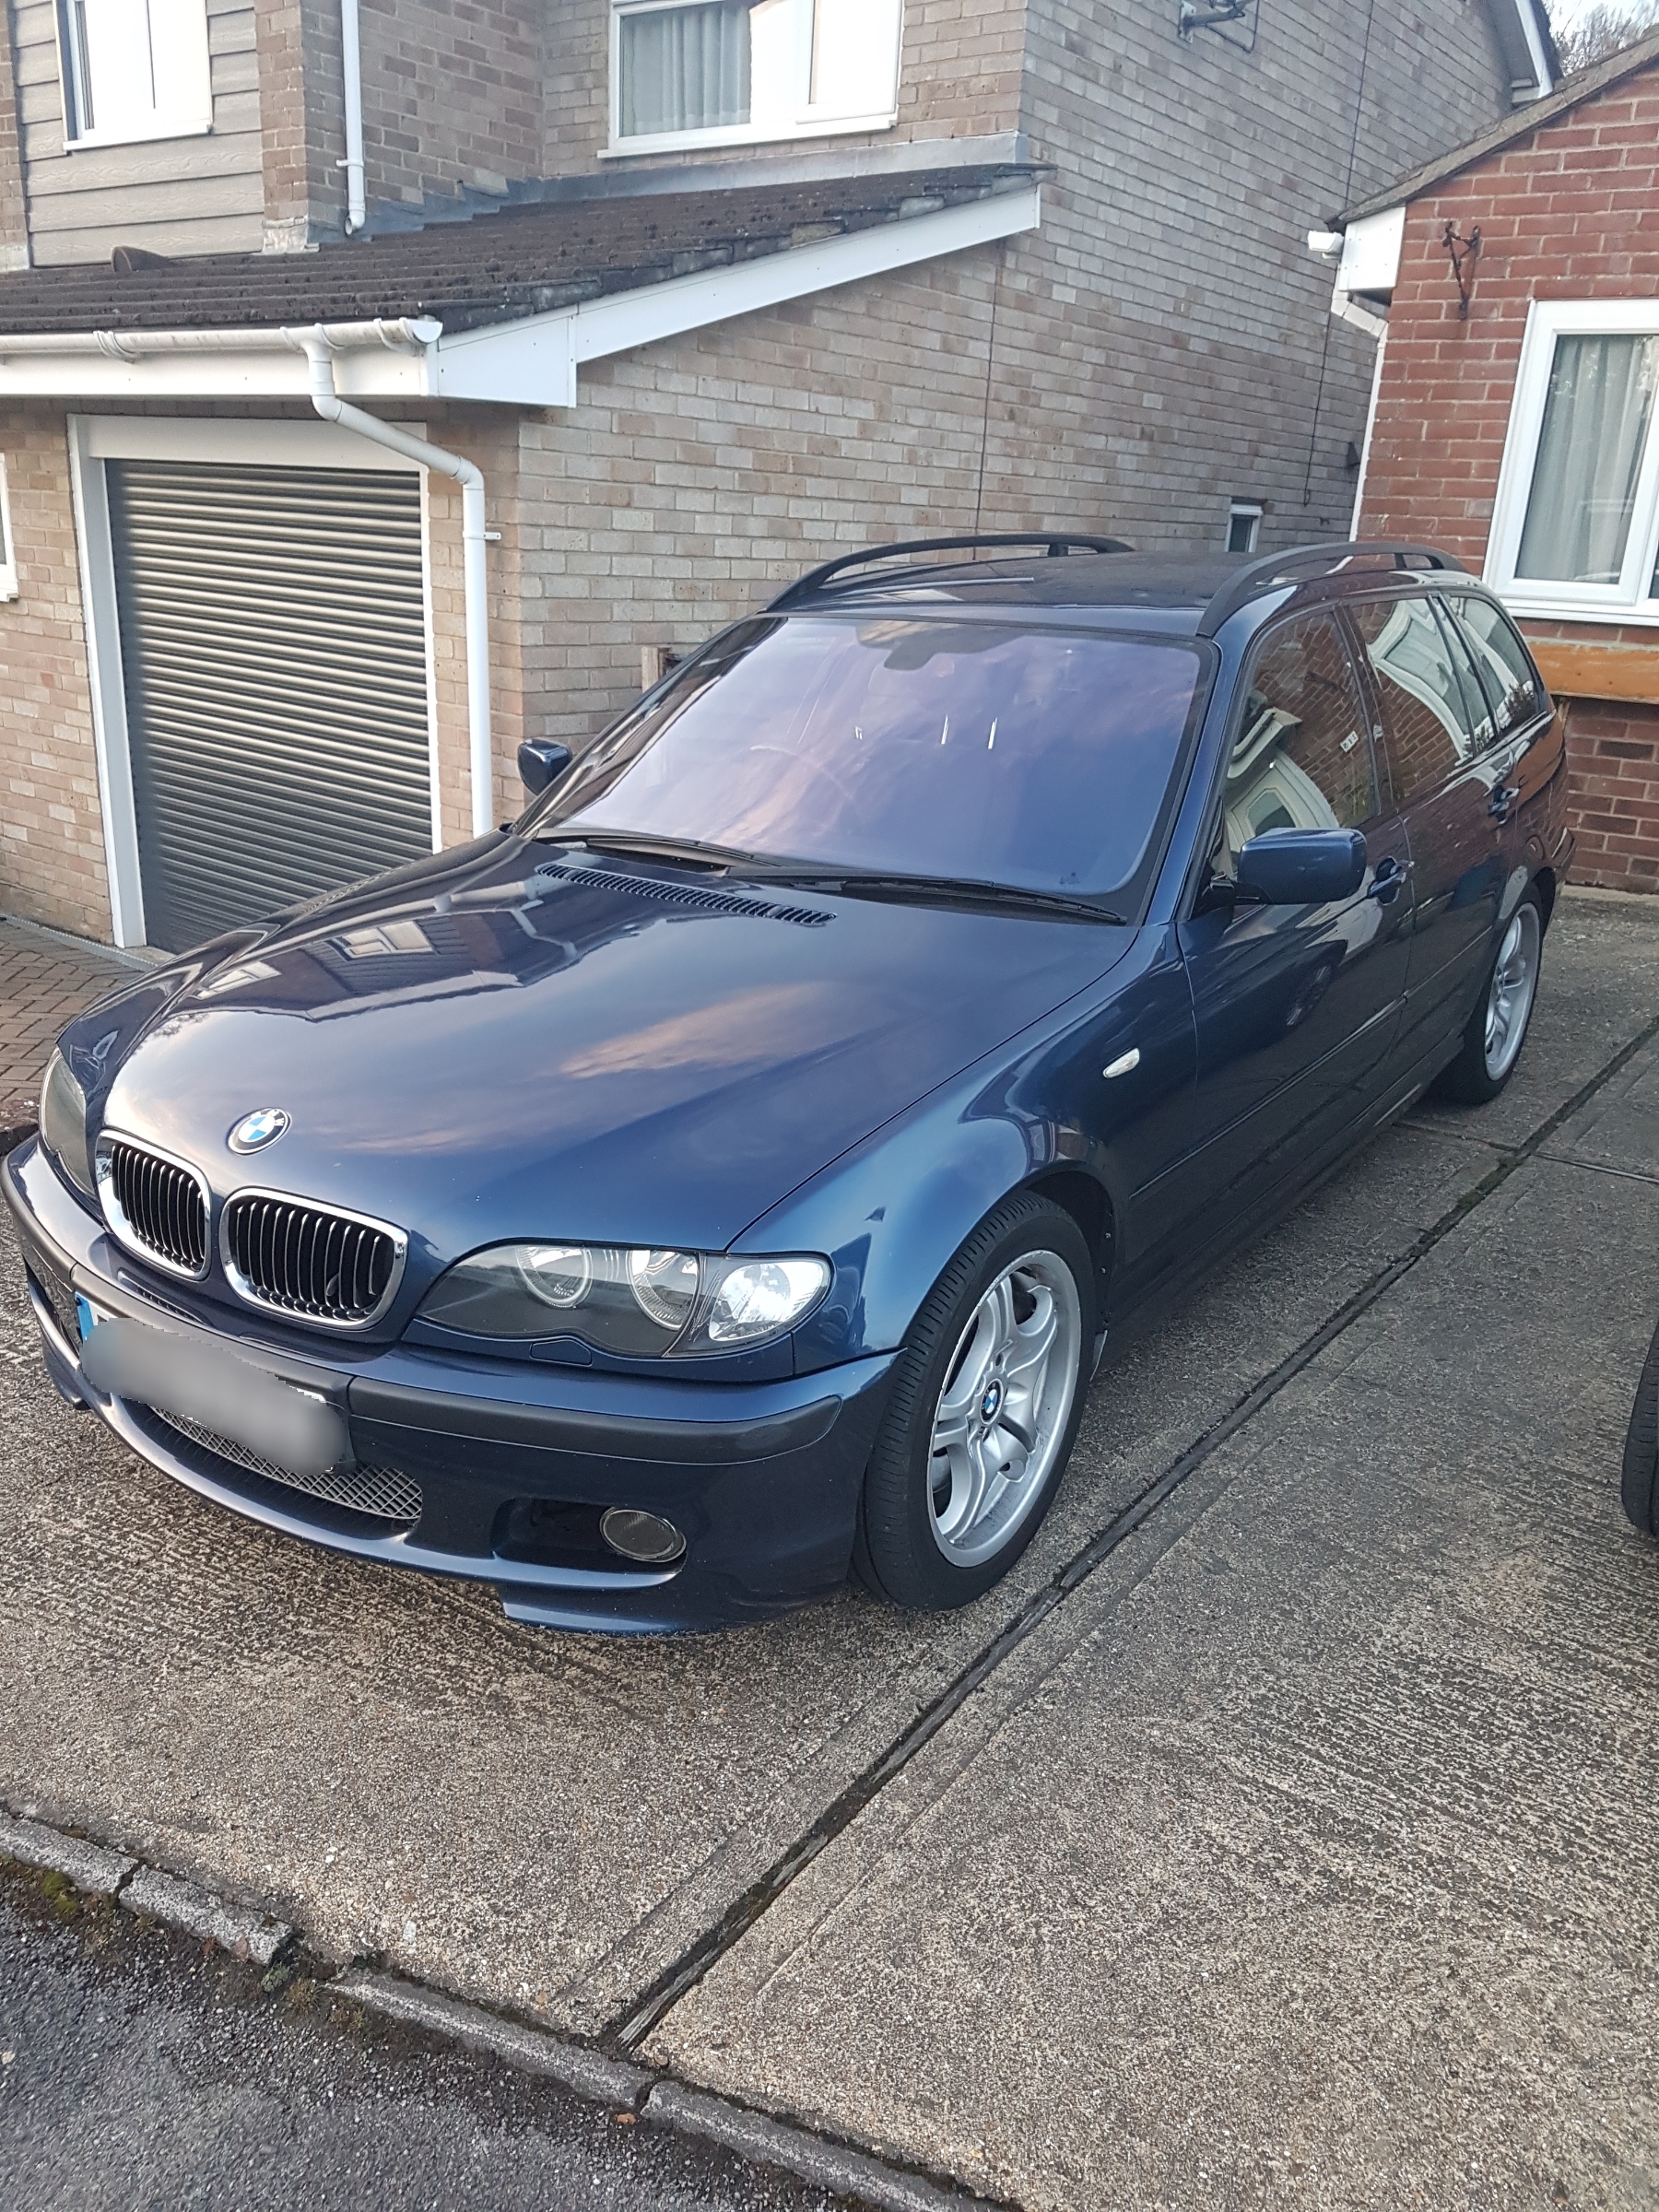 BMW 330D E46 - My new car - Page 3 - Readers' Cars - PistonHeads